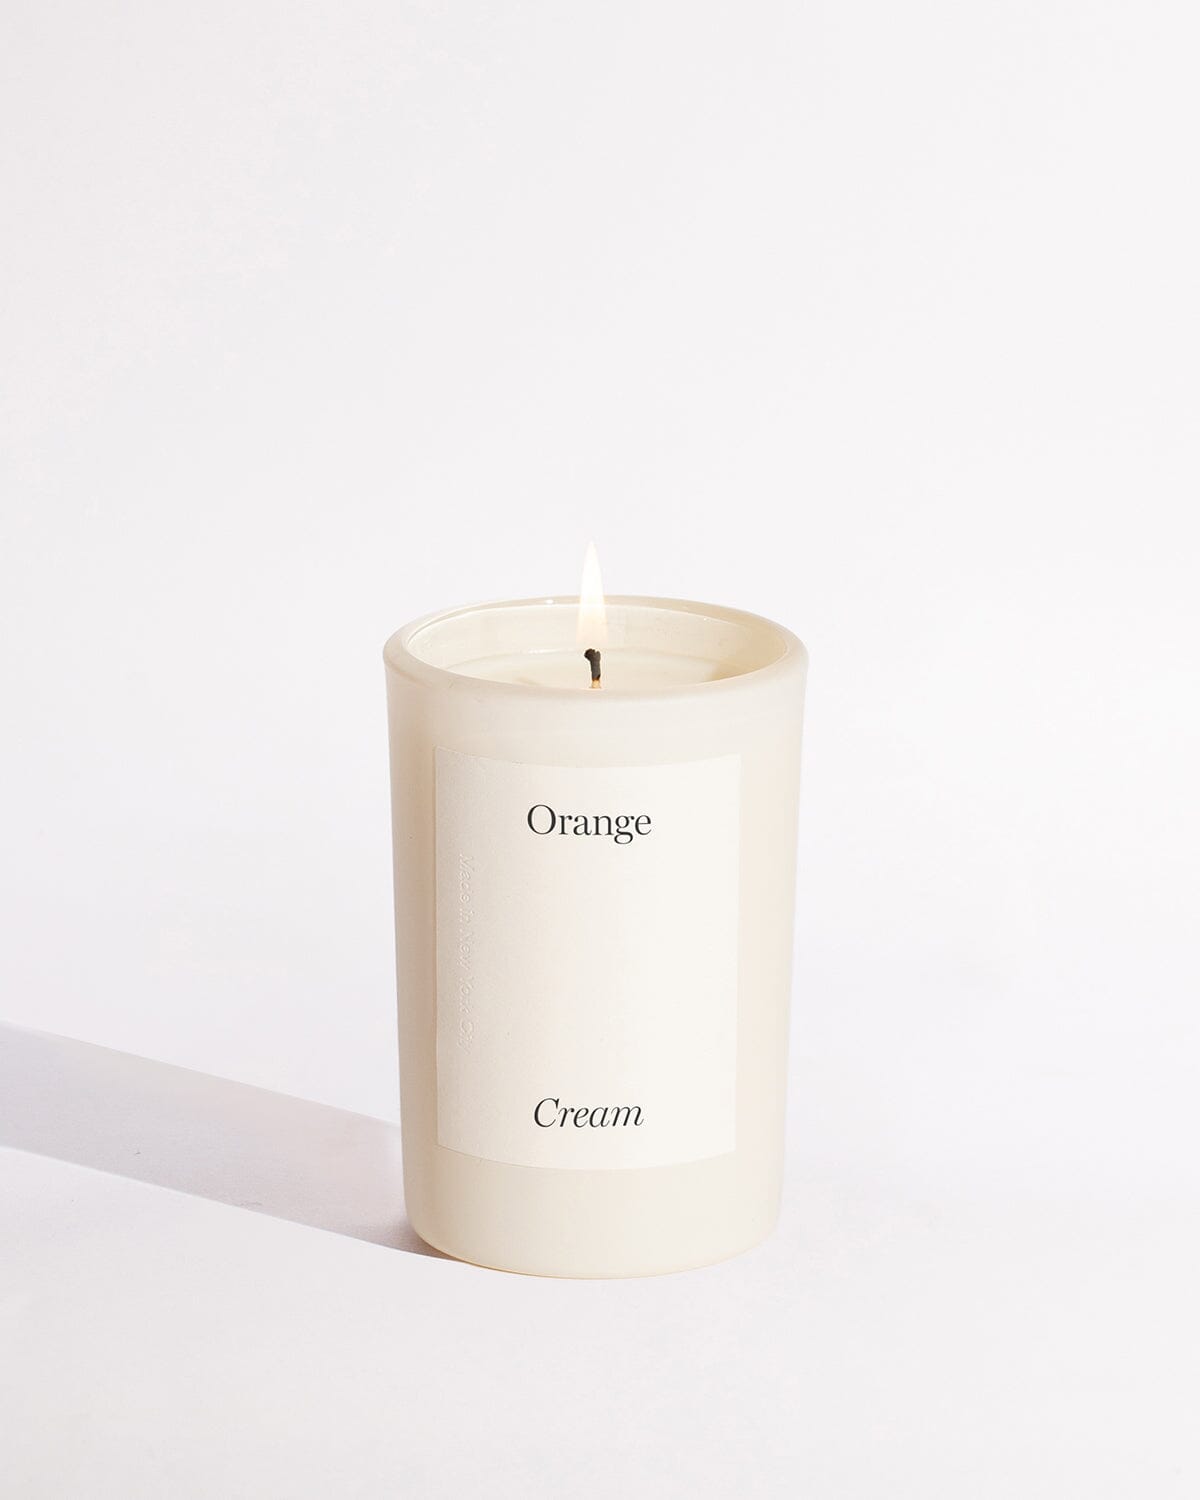 Limited Edition Orange Cream Candle Limited Edition Brooklyn Candle Studio 